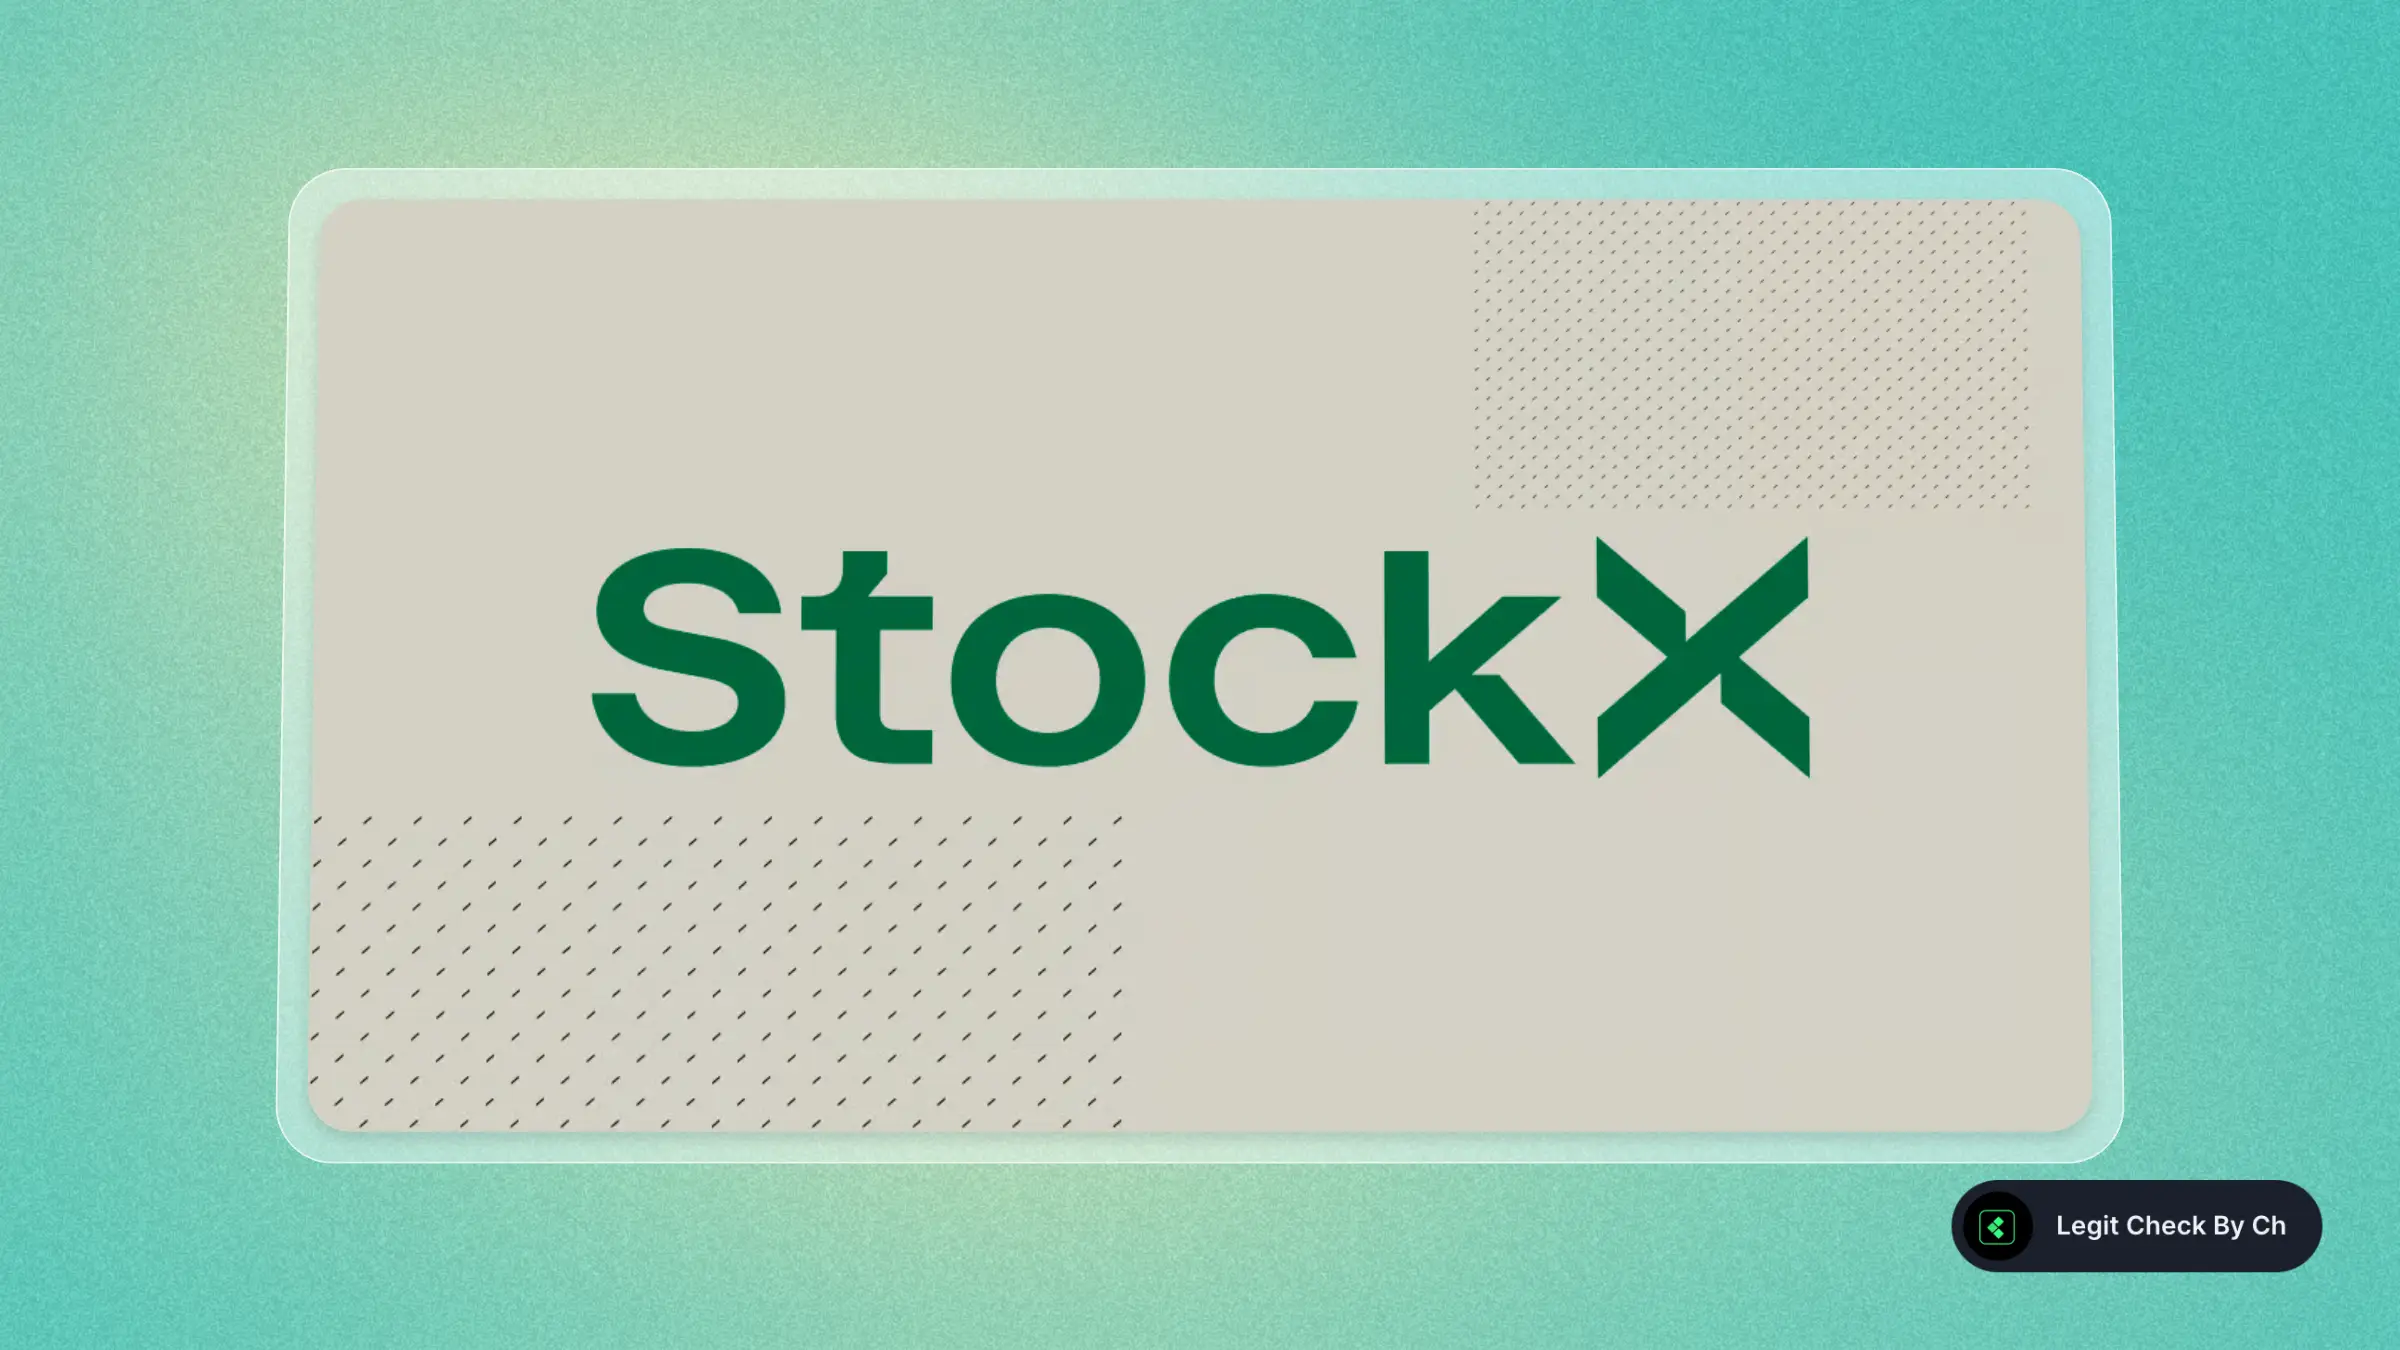 How to contact StockX